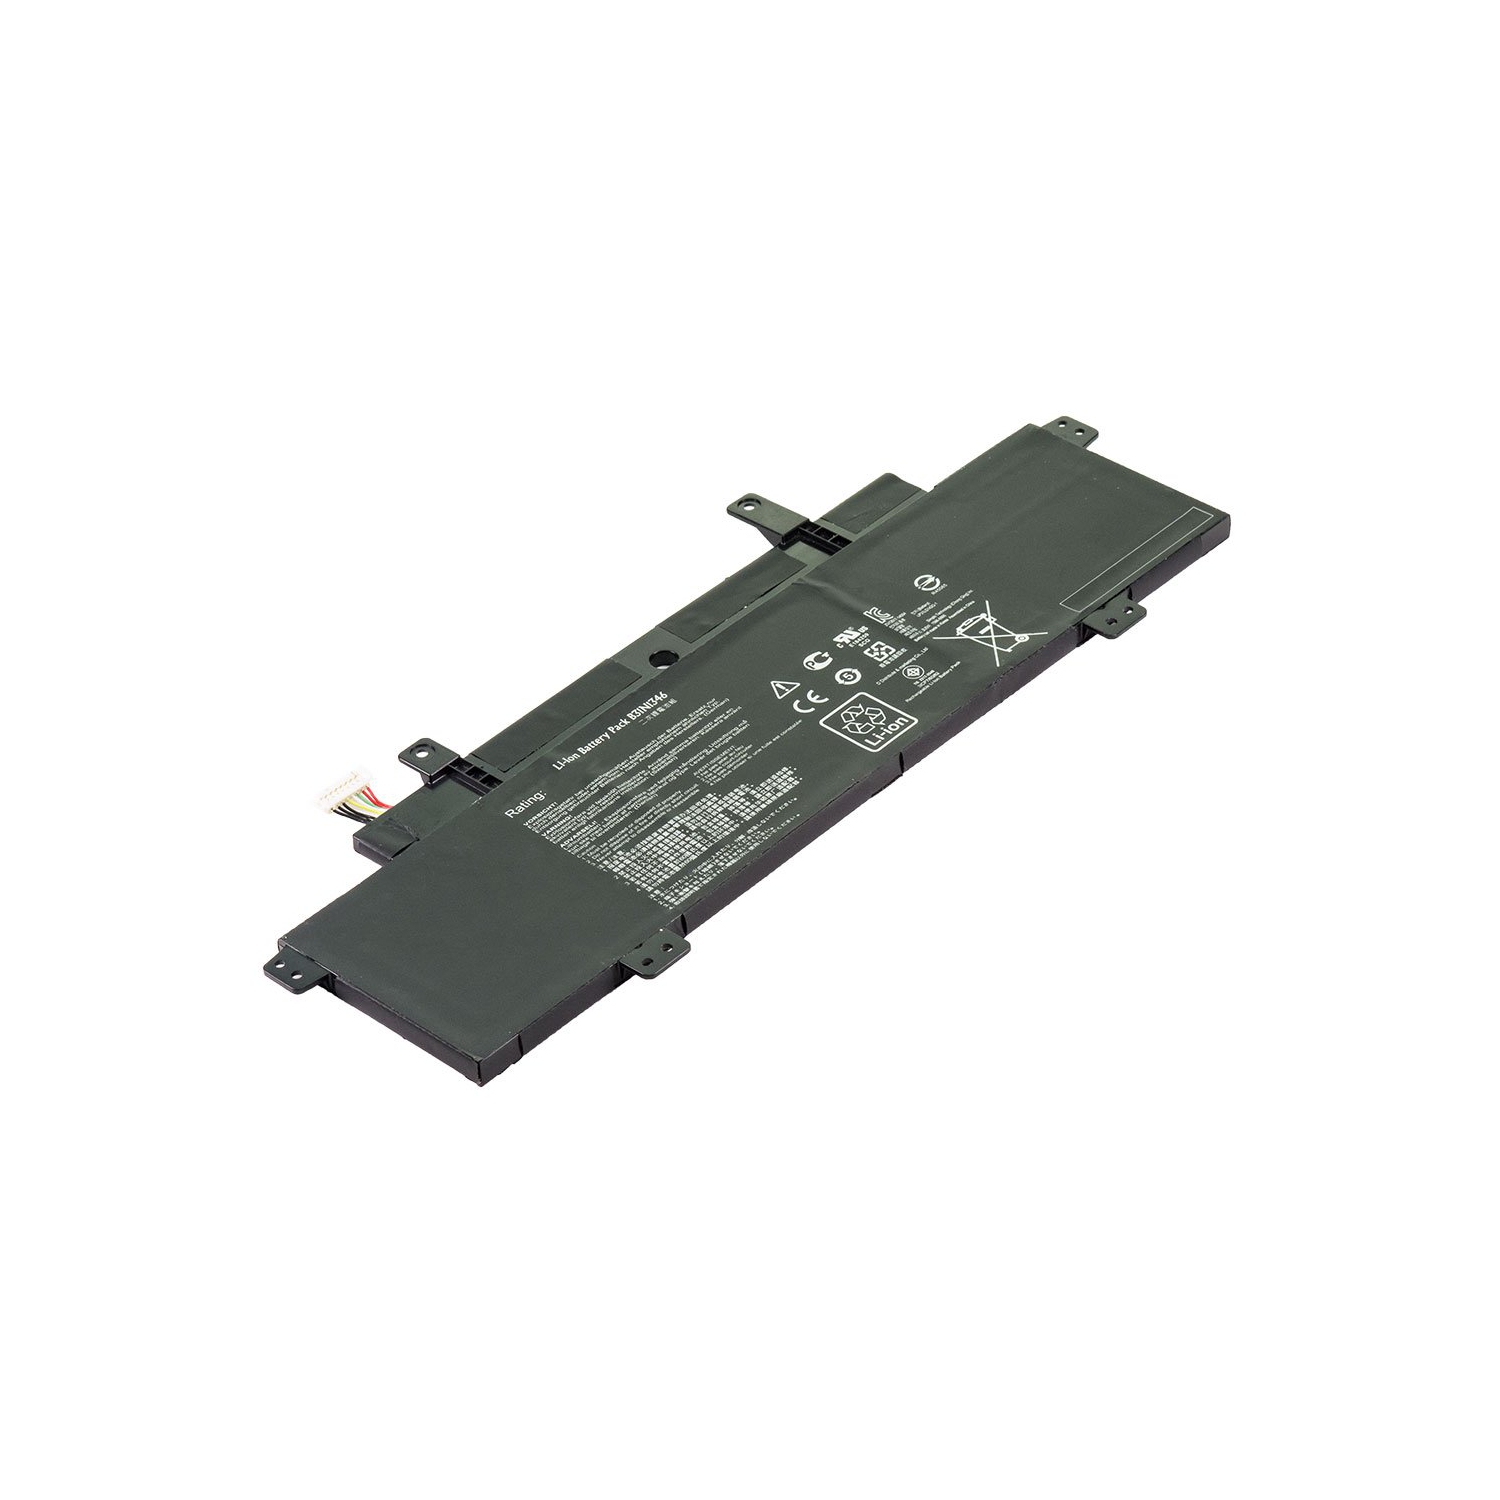 Laptop Battery Replacement for Asus Chromebook 13 C300MA-DB01, B31N1346, B31NI346, Chromebook 13 C300MA